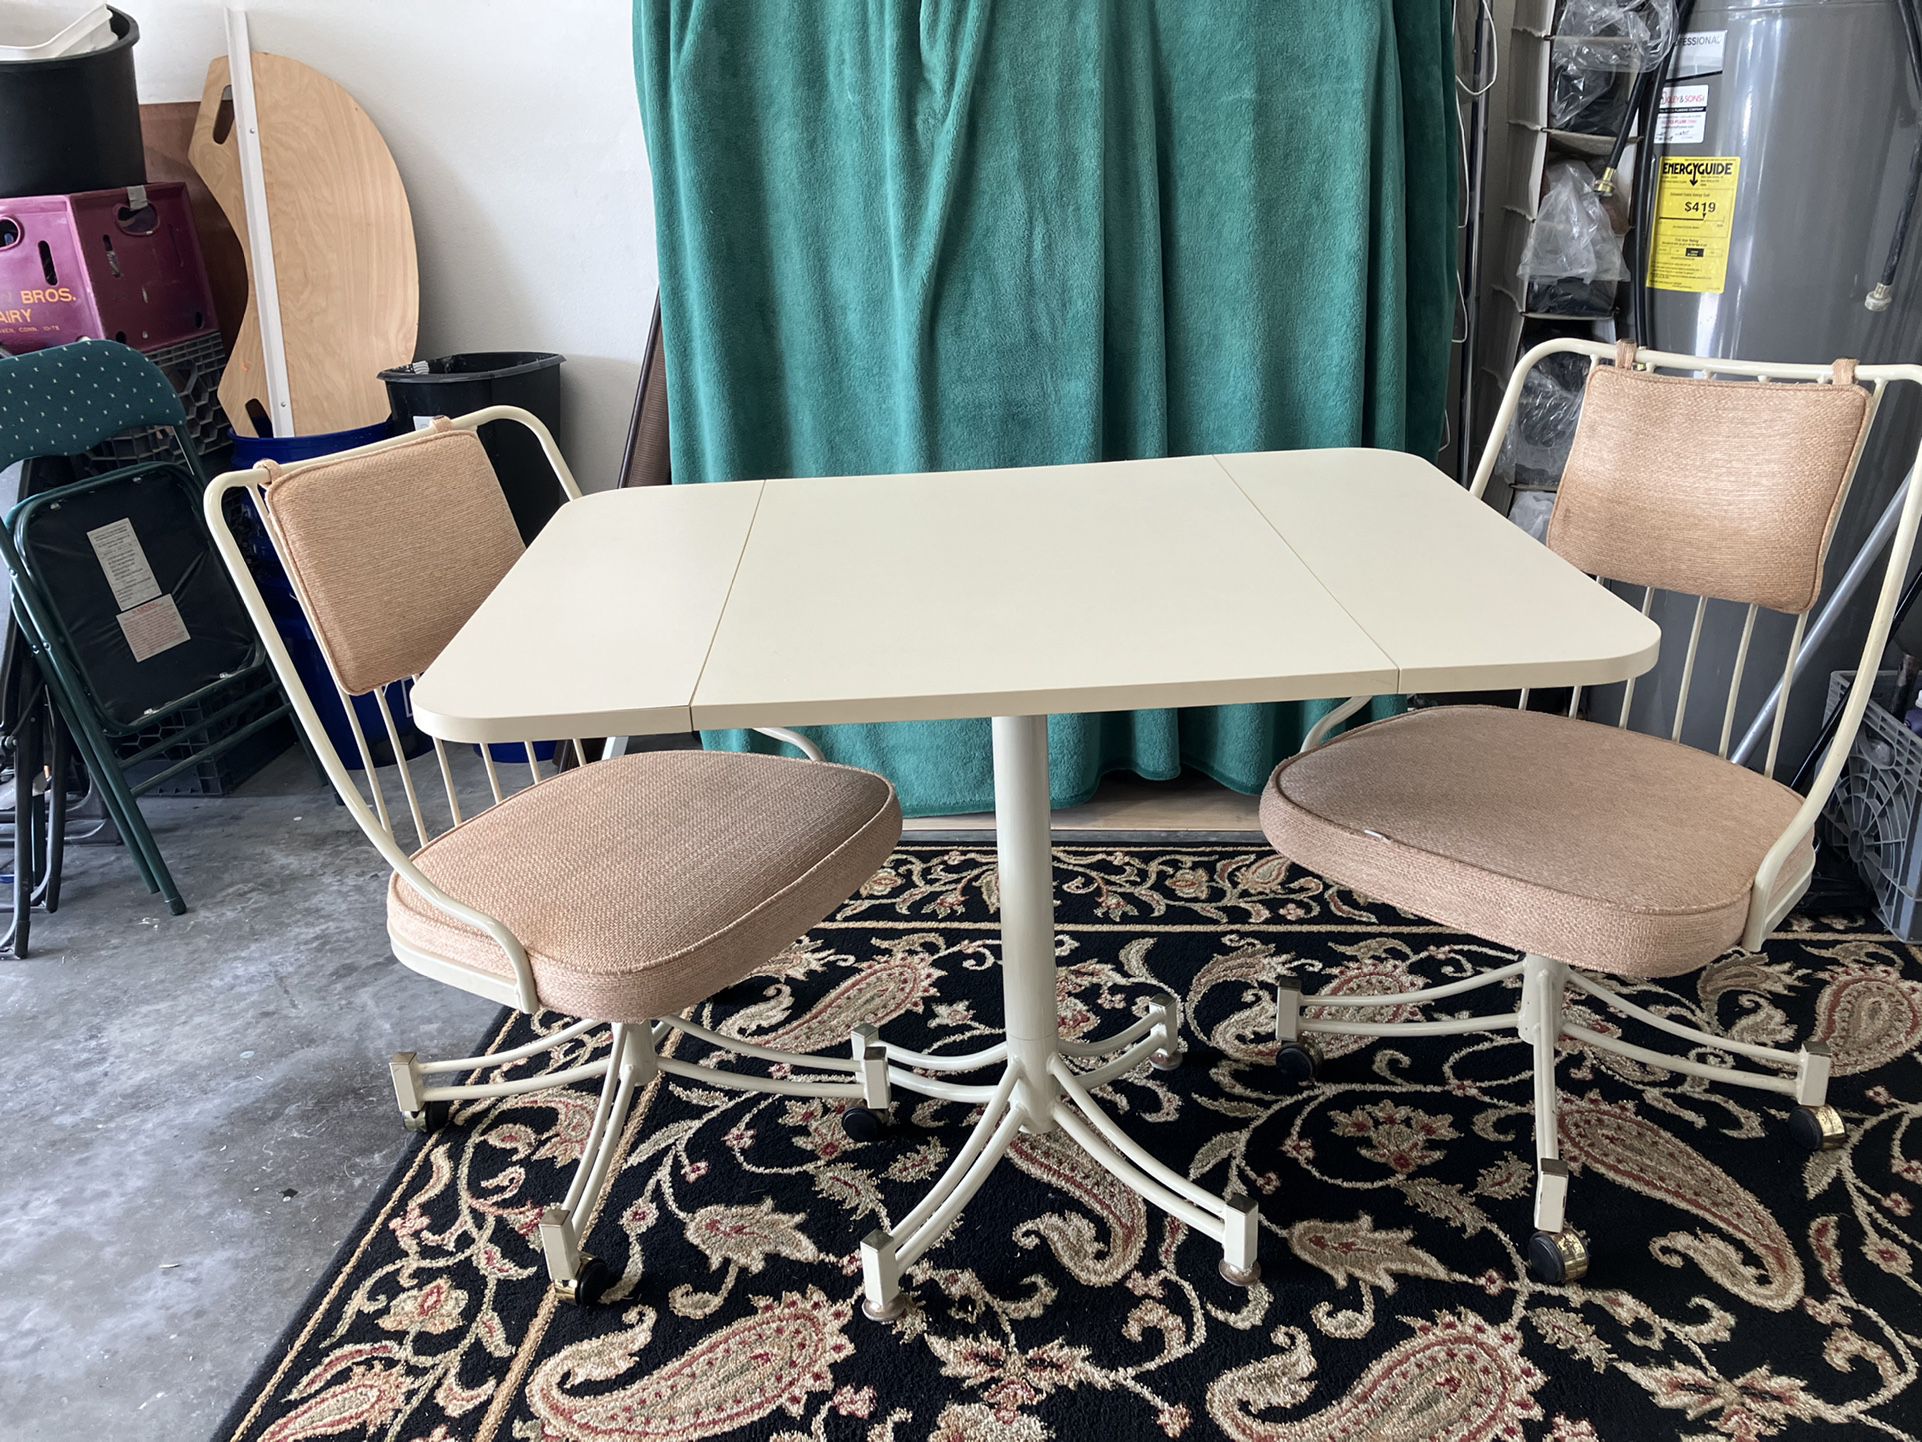 RETRO DROP LEAF FORMICA TOP ENAMELED PAINTED METAL PEDASTAL TABLE W/ 2 Matching   Swivel ~ROLL  Chairs 